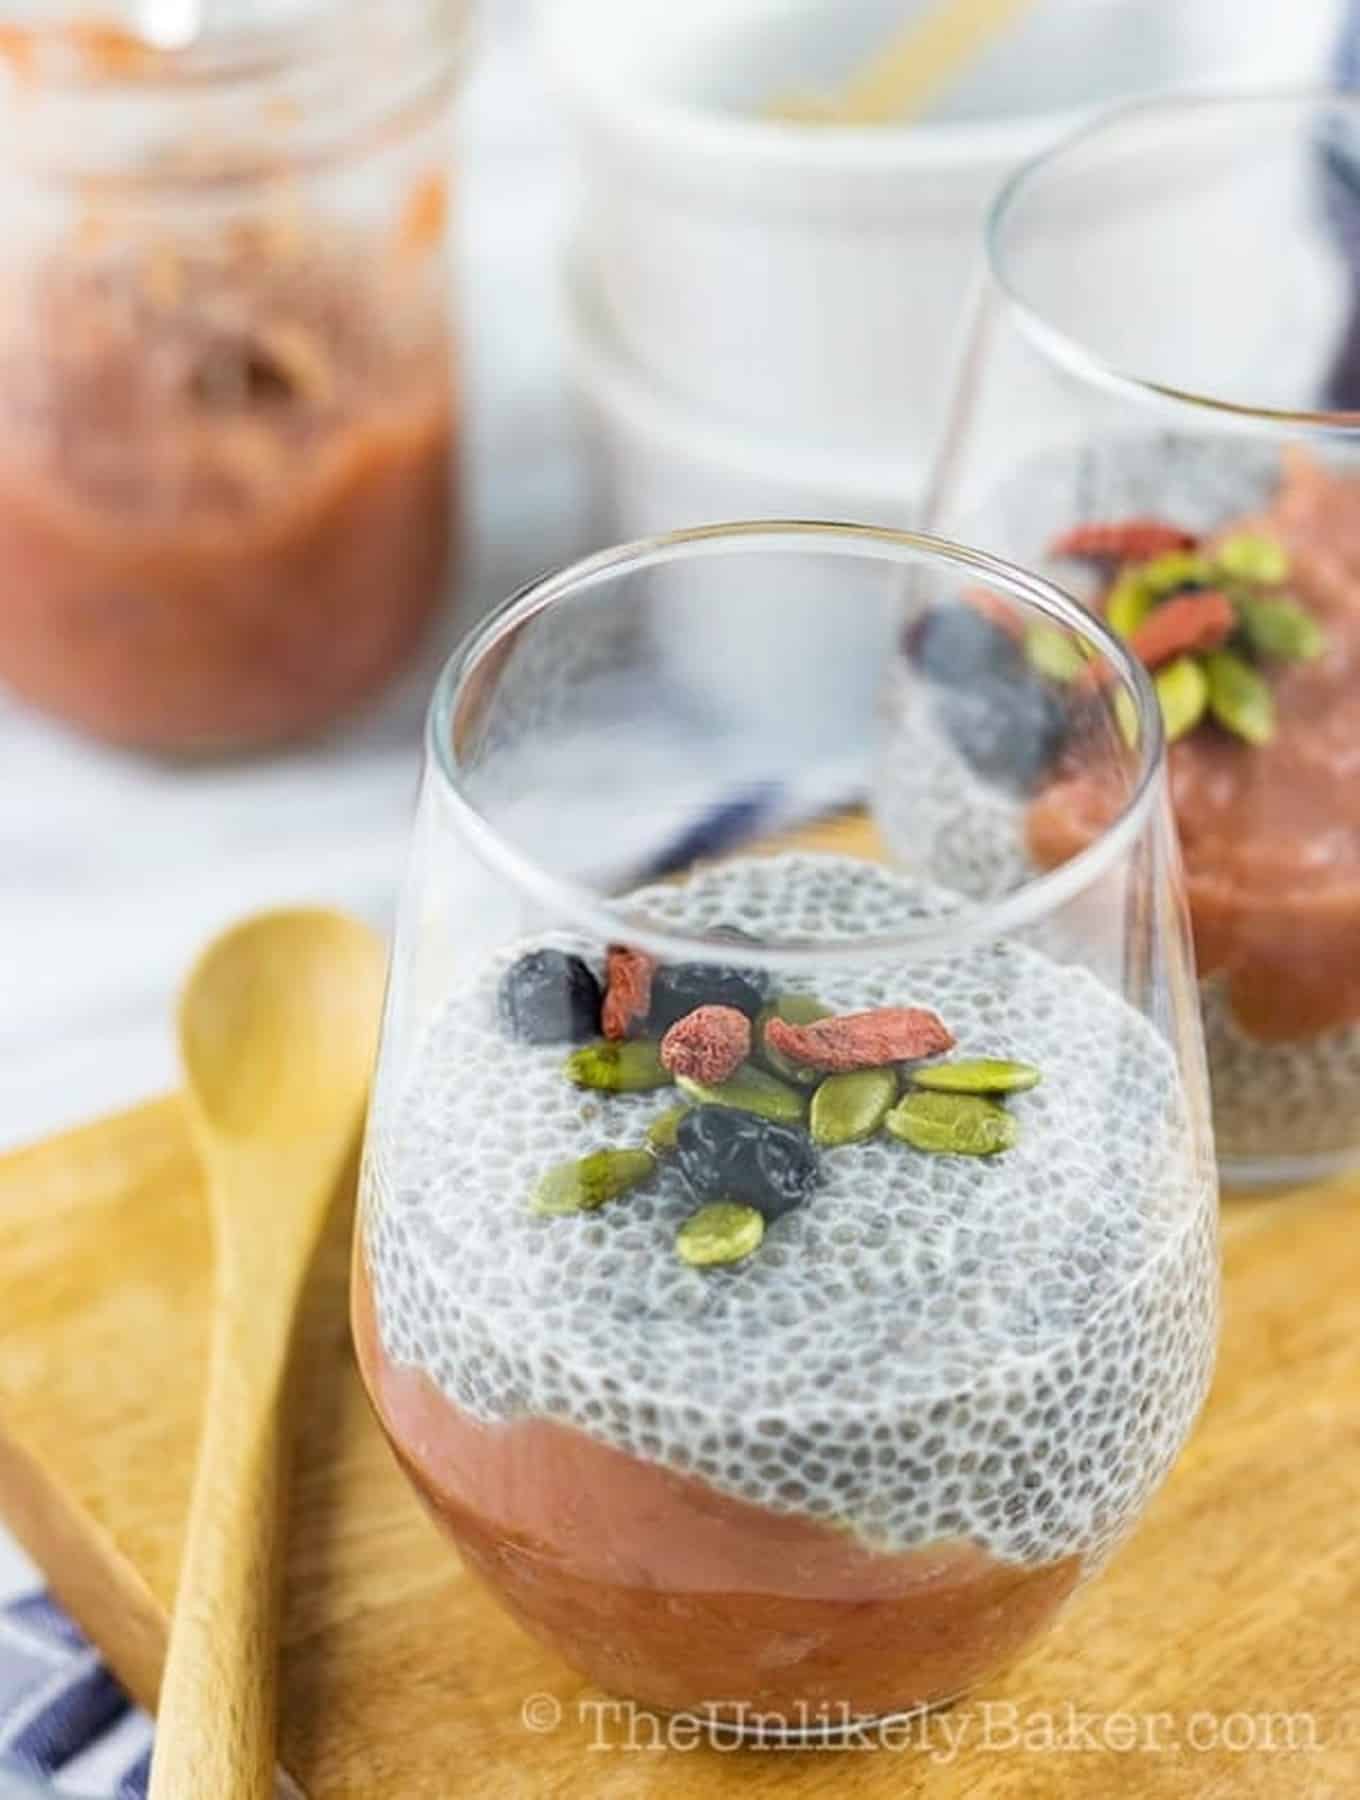 Rhubarb Chia Pudding in a clear glass.